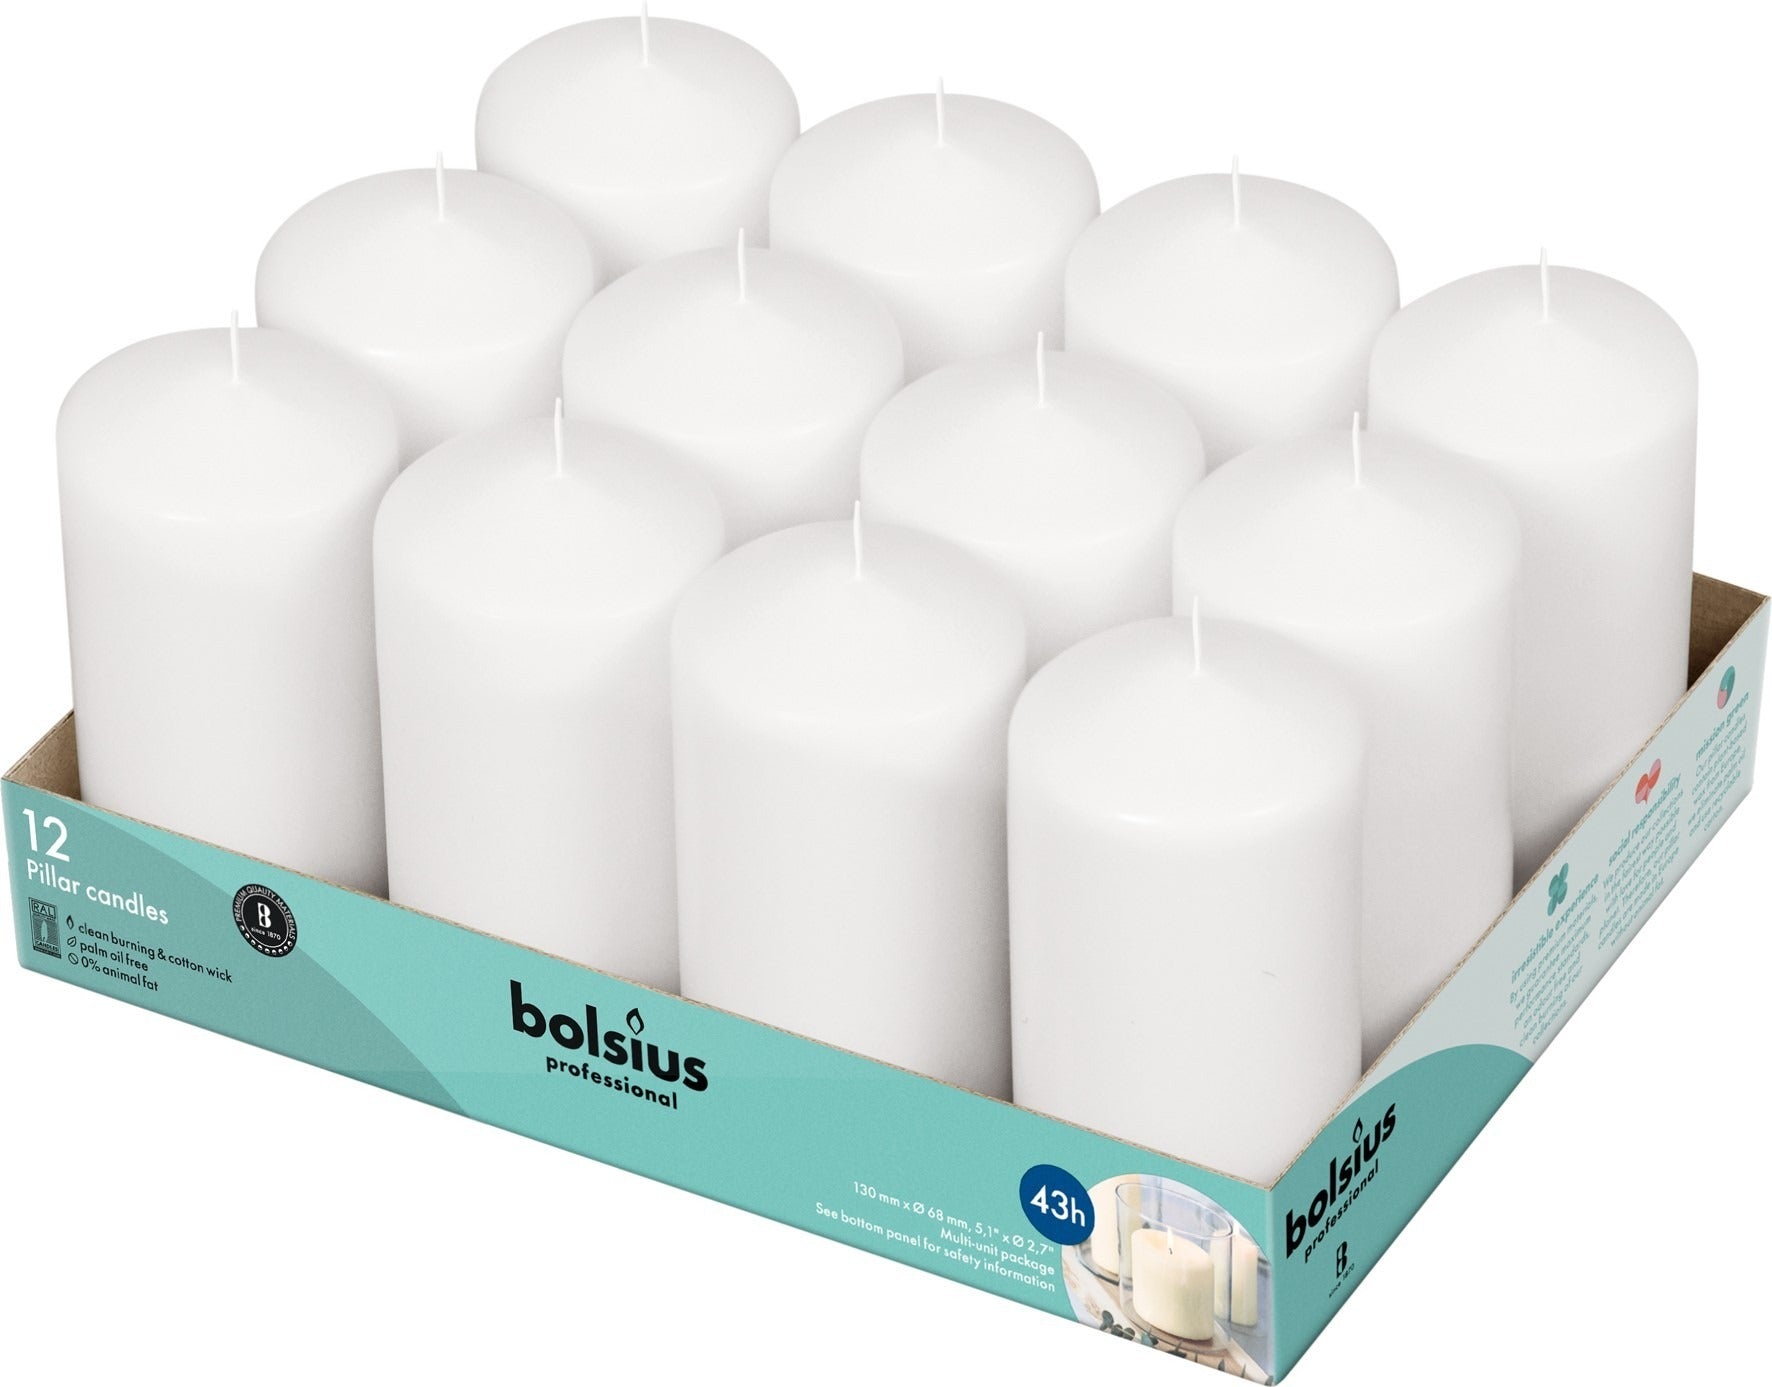 View 12 Bolsius Professional Pillar Candles White 12868mm information